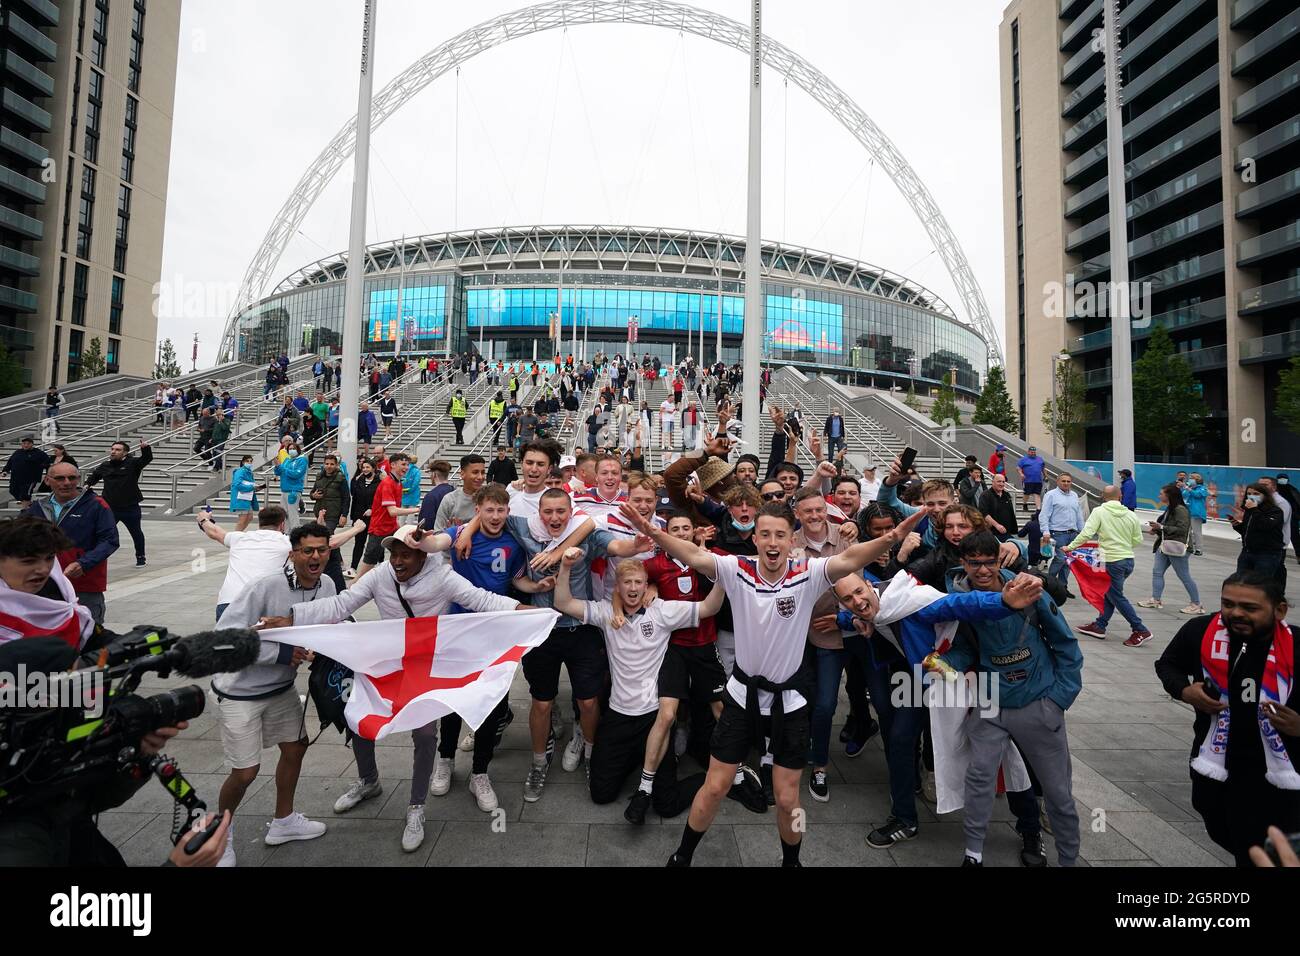 Fans celebrate the UEFA Euro 2020 round of 16 match between England and Germany at the 4TheFans fan zone outside Wembley Stadium. Picture date: Tuesday June 29, 2021. Stock Photo